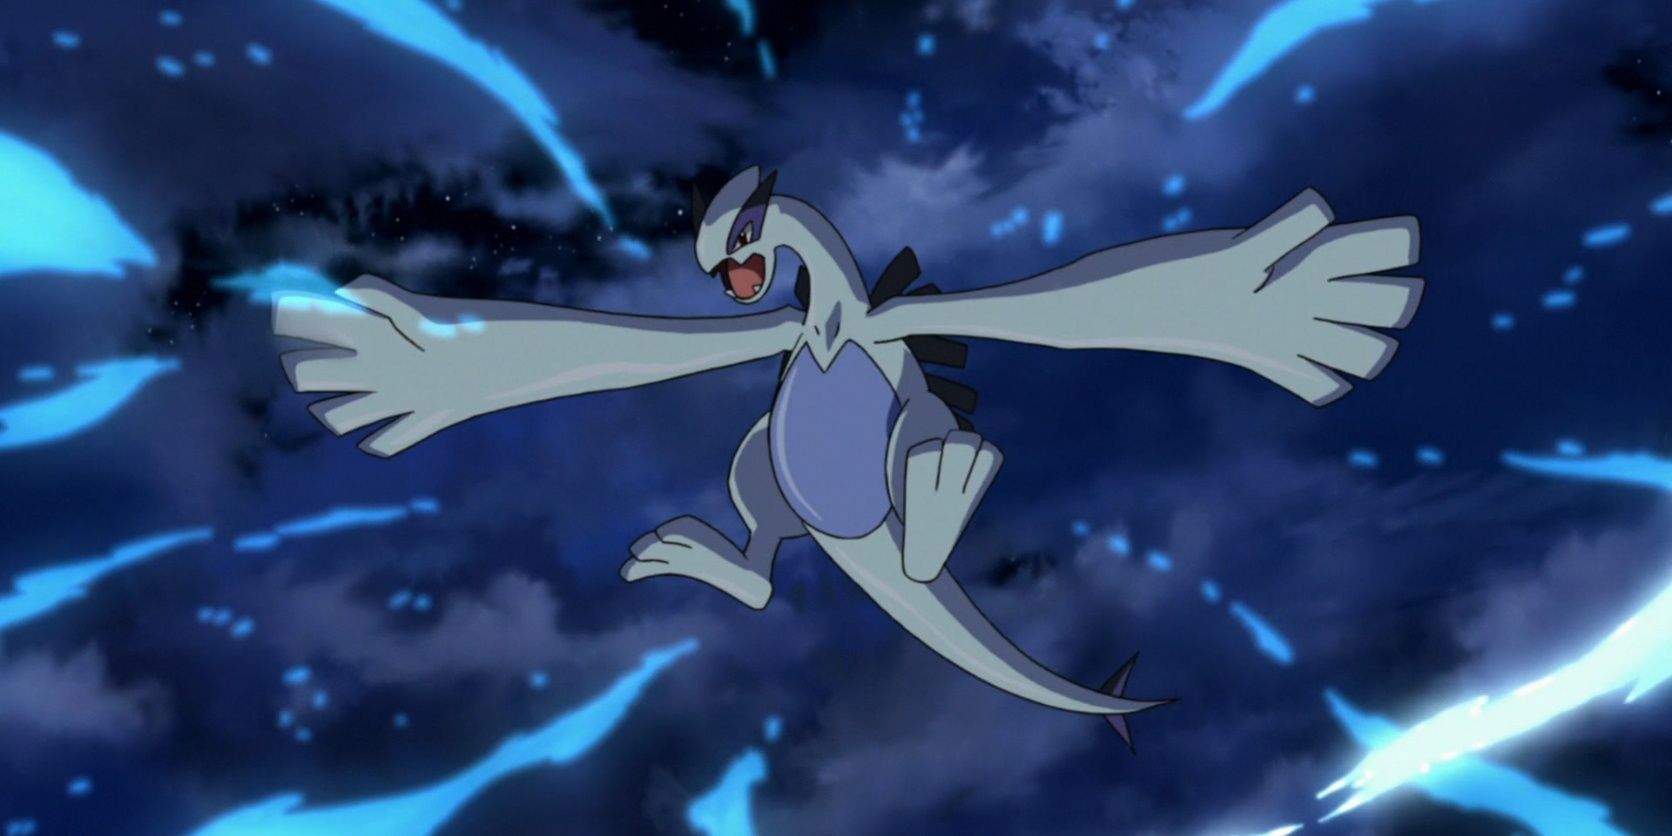 Lugia flies and attacks in the night sky in the Pokemon anime.